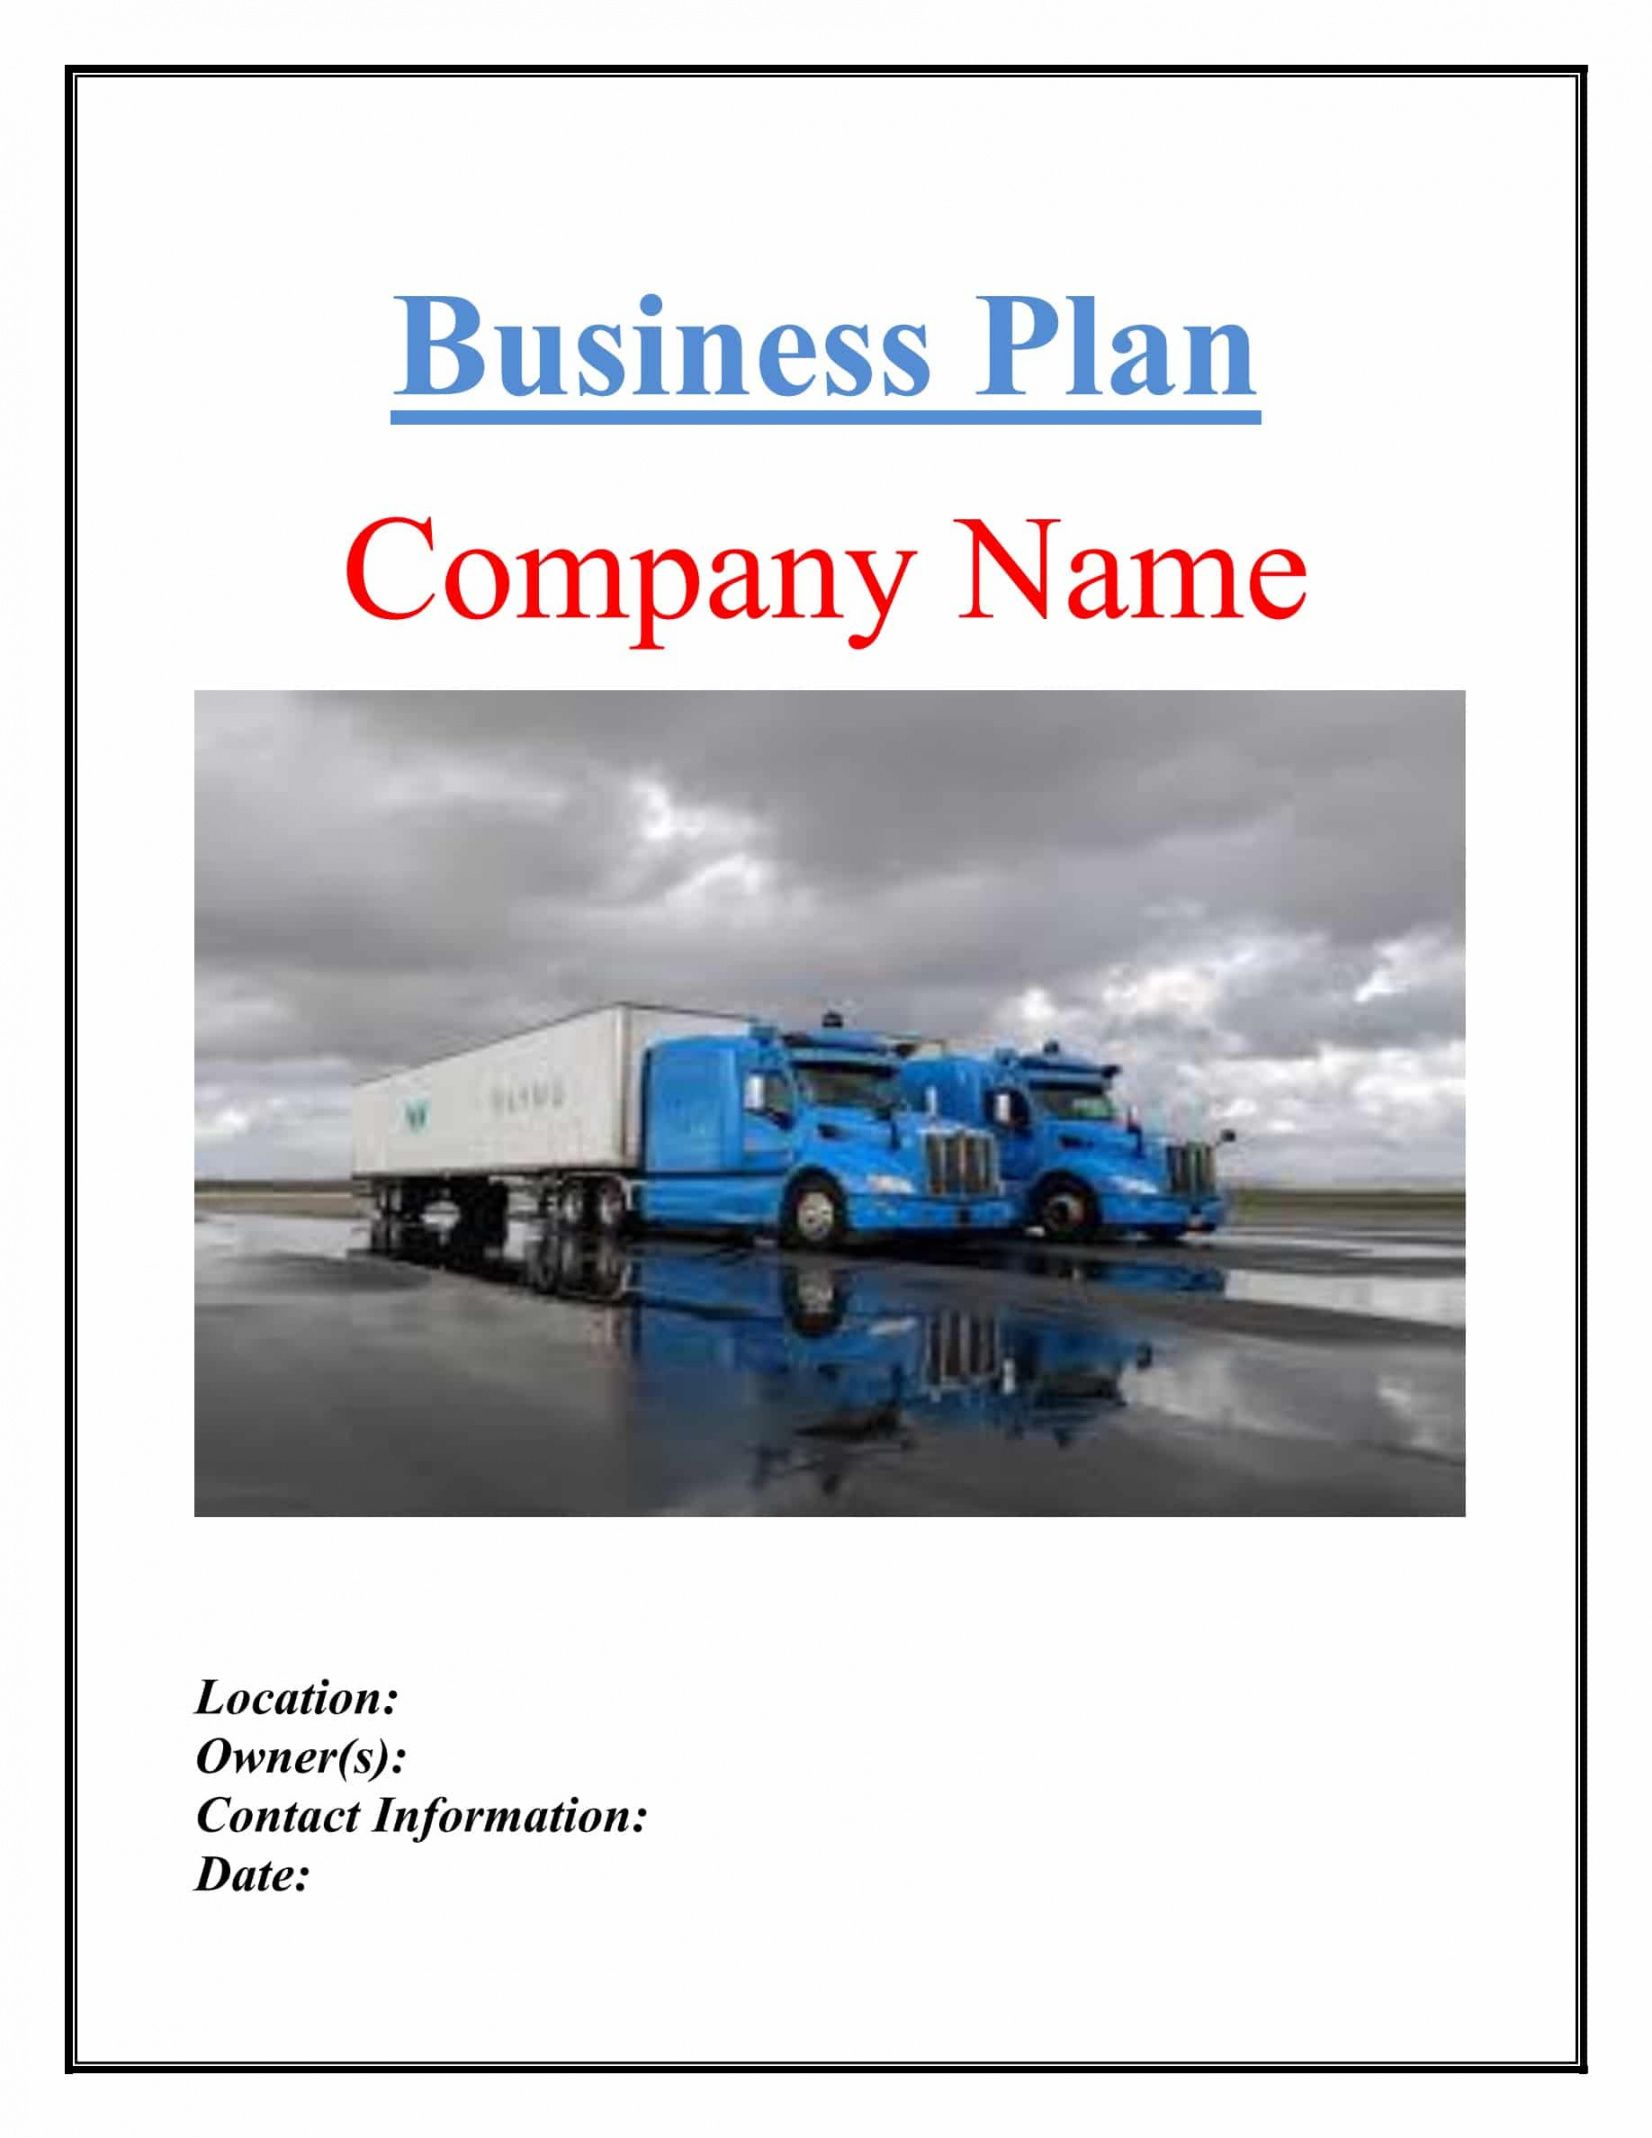 box truck business plan example